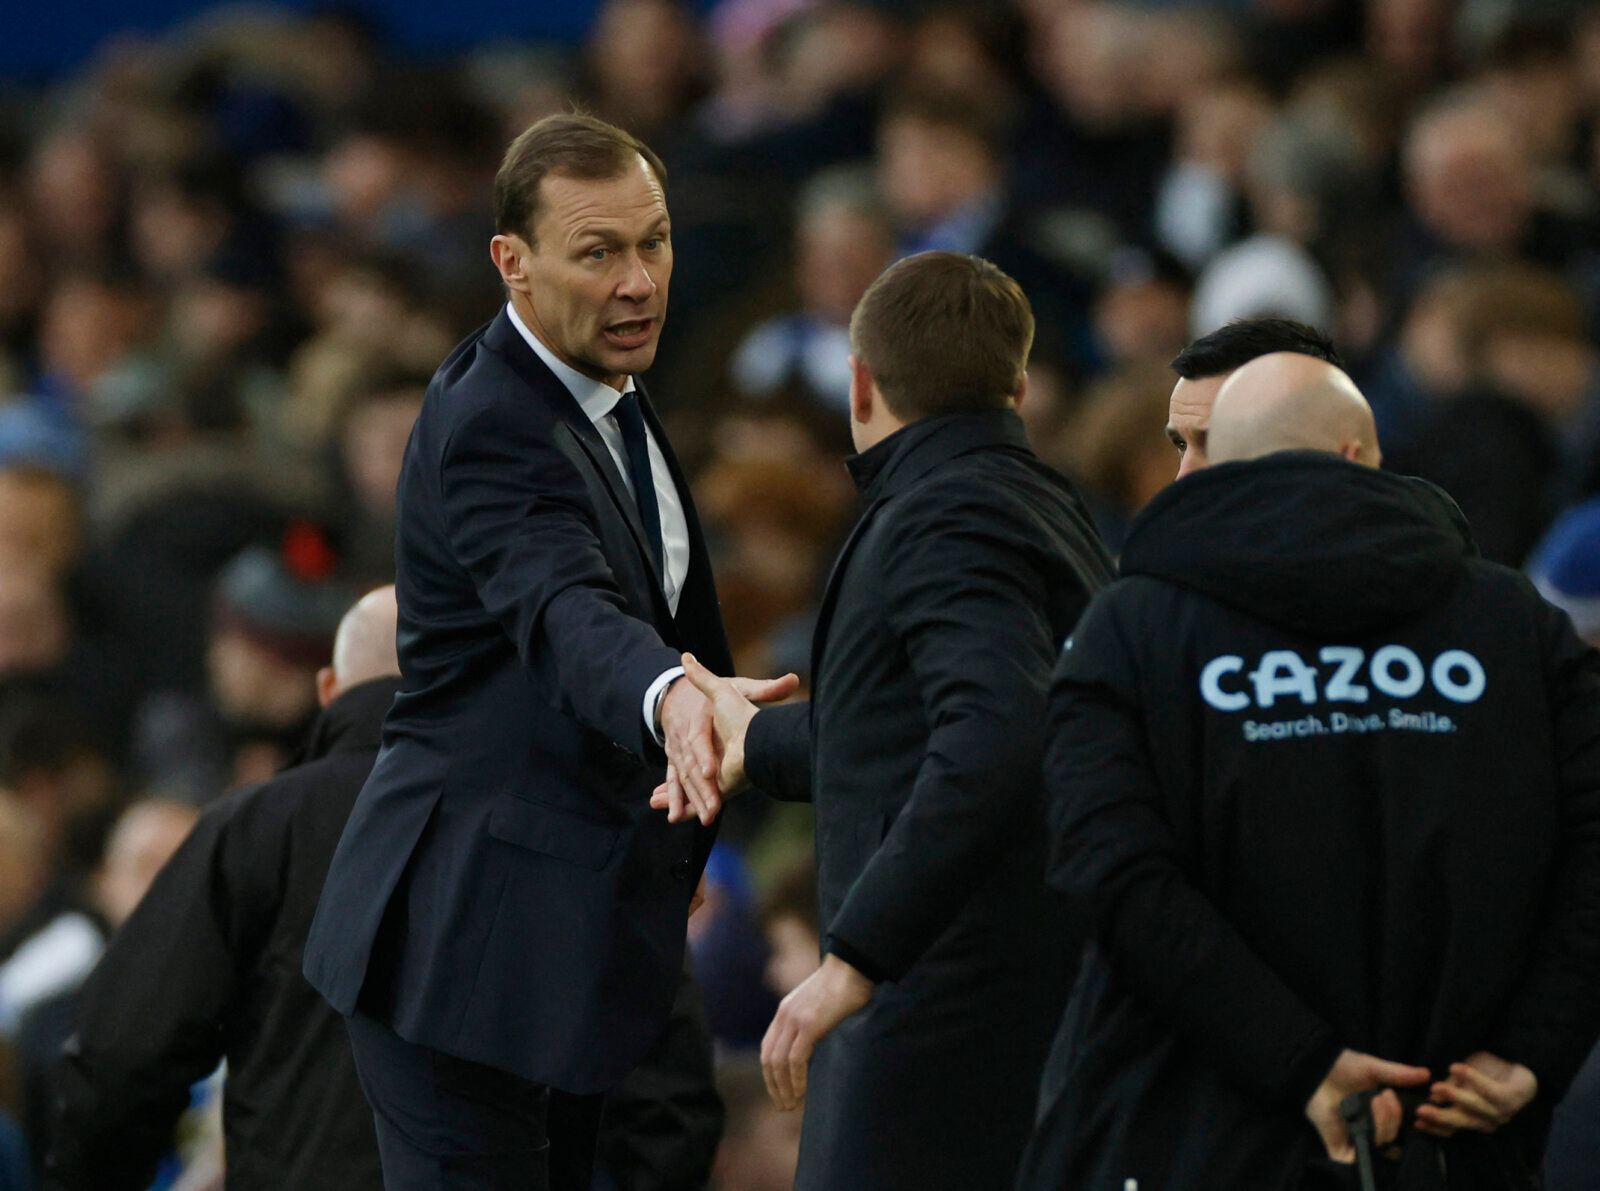 Soccer Football - Premier League - Everton v Aston Villa - Goodison Park, Liverpool, Britain - January 22, 2022 Everton interim manager Duncan Ferguson shakes hands with Aston Villa manager Steven Gerrard after the match Action Images via Reuters/Jason Cairnduff EDITORIAL USE ONLY. No use with unauthorized audio, video, data, fixture lists, club/league logos or 'live' services. Online in-match use limited to 75 images, no video emulation. No use in betting, games or single club /league/player pu